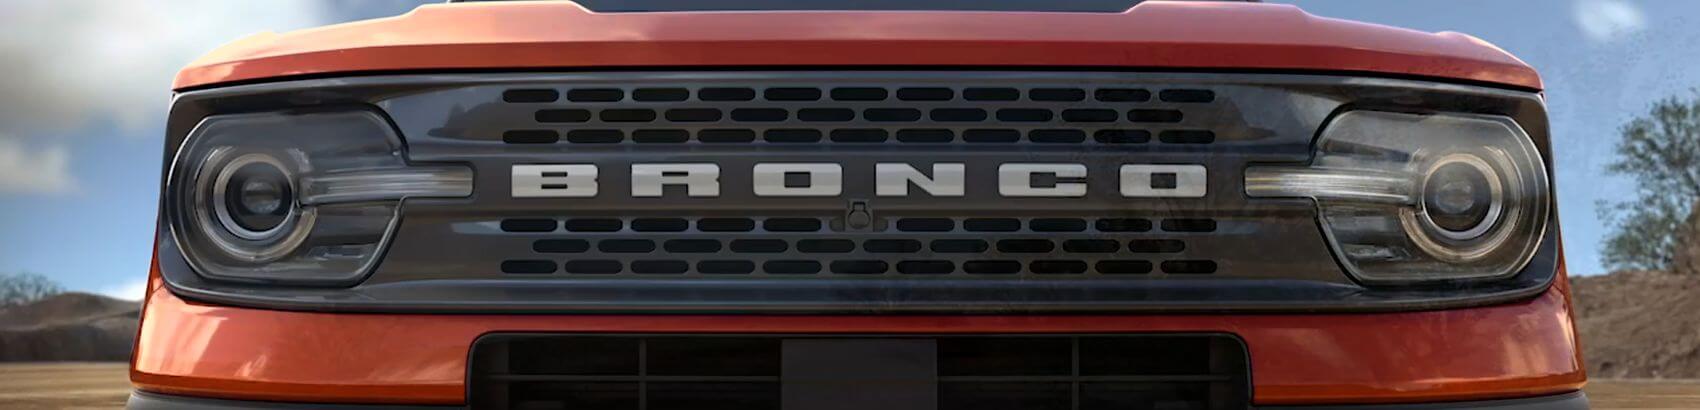 Bronco grille